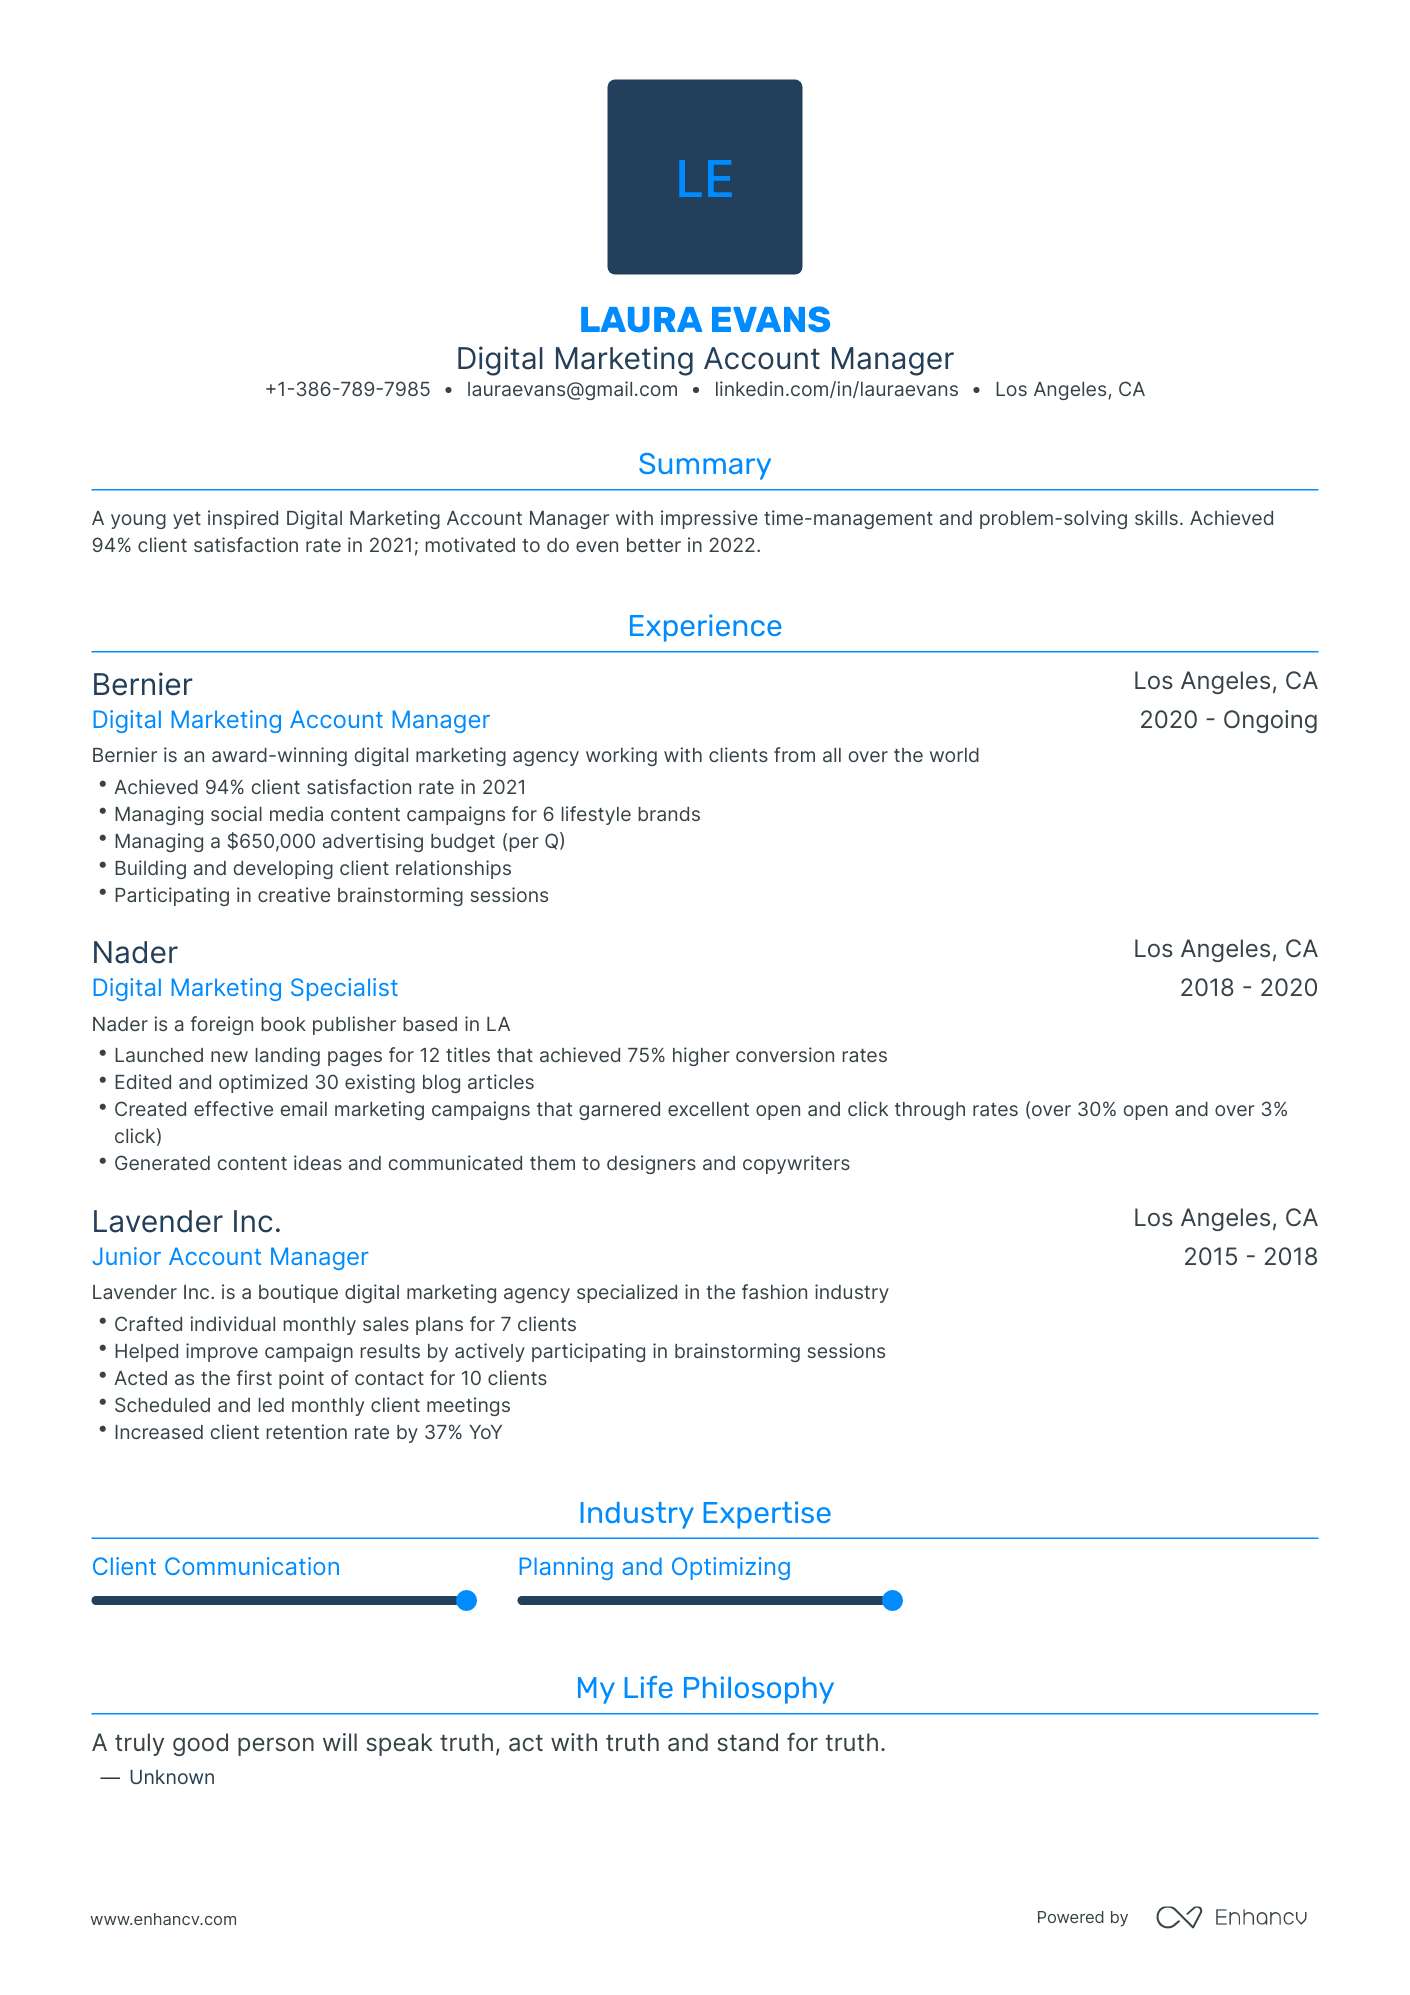 Traditional Digital Marketing Account Manager Resume Template